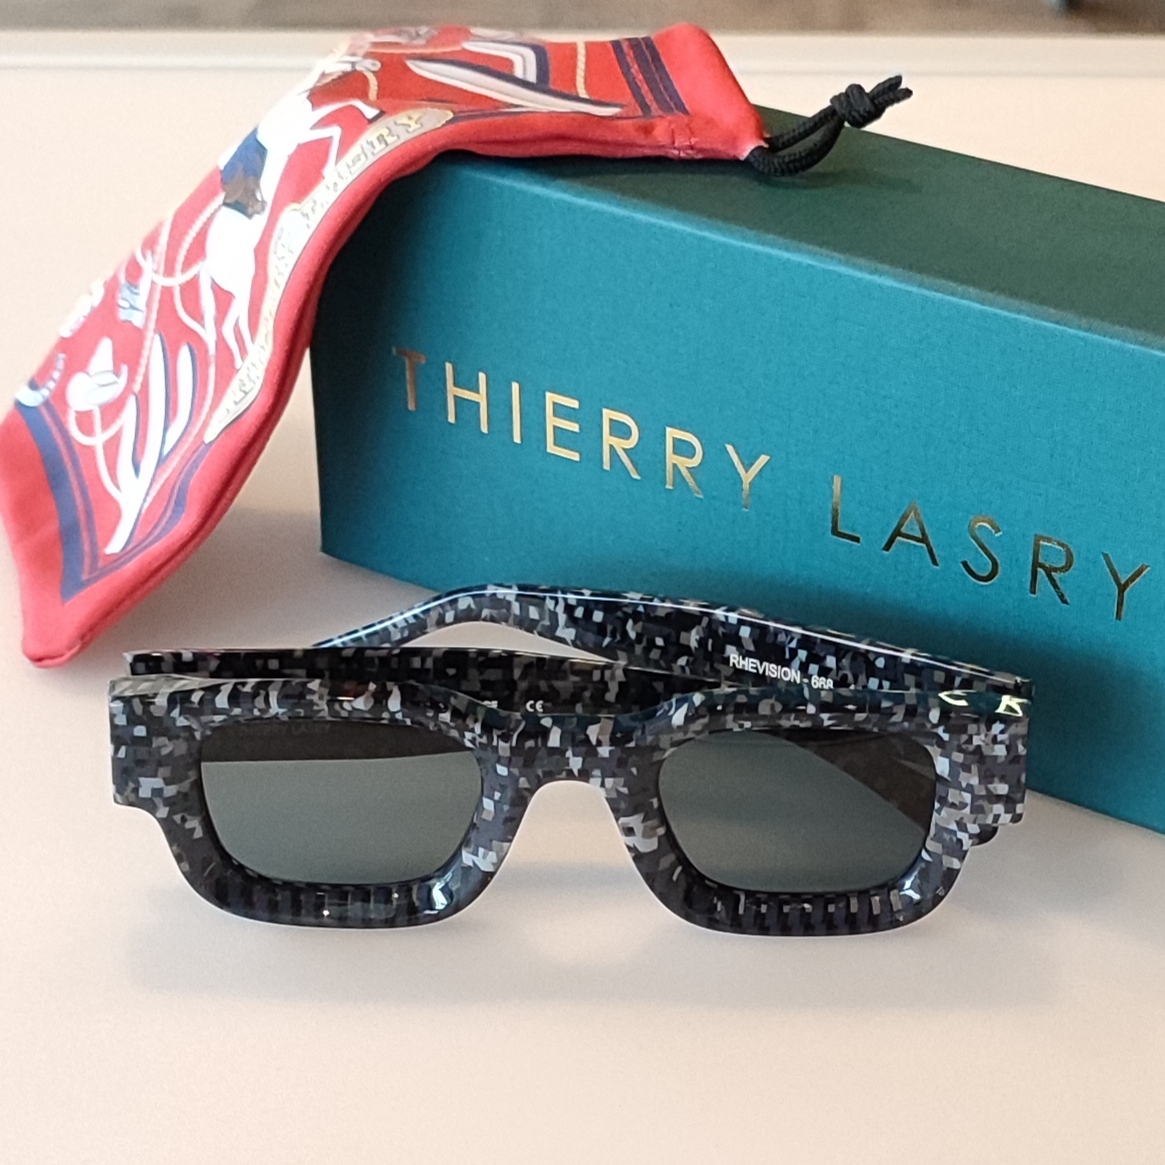 Theirry Lasry Rhevision frame in colour 668